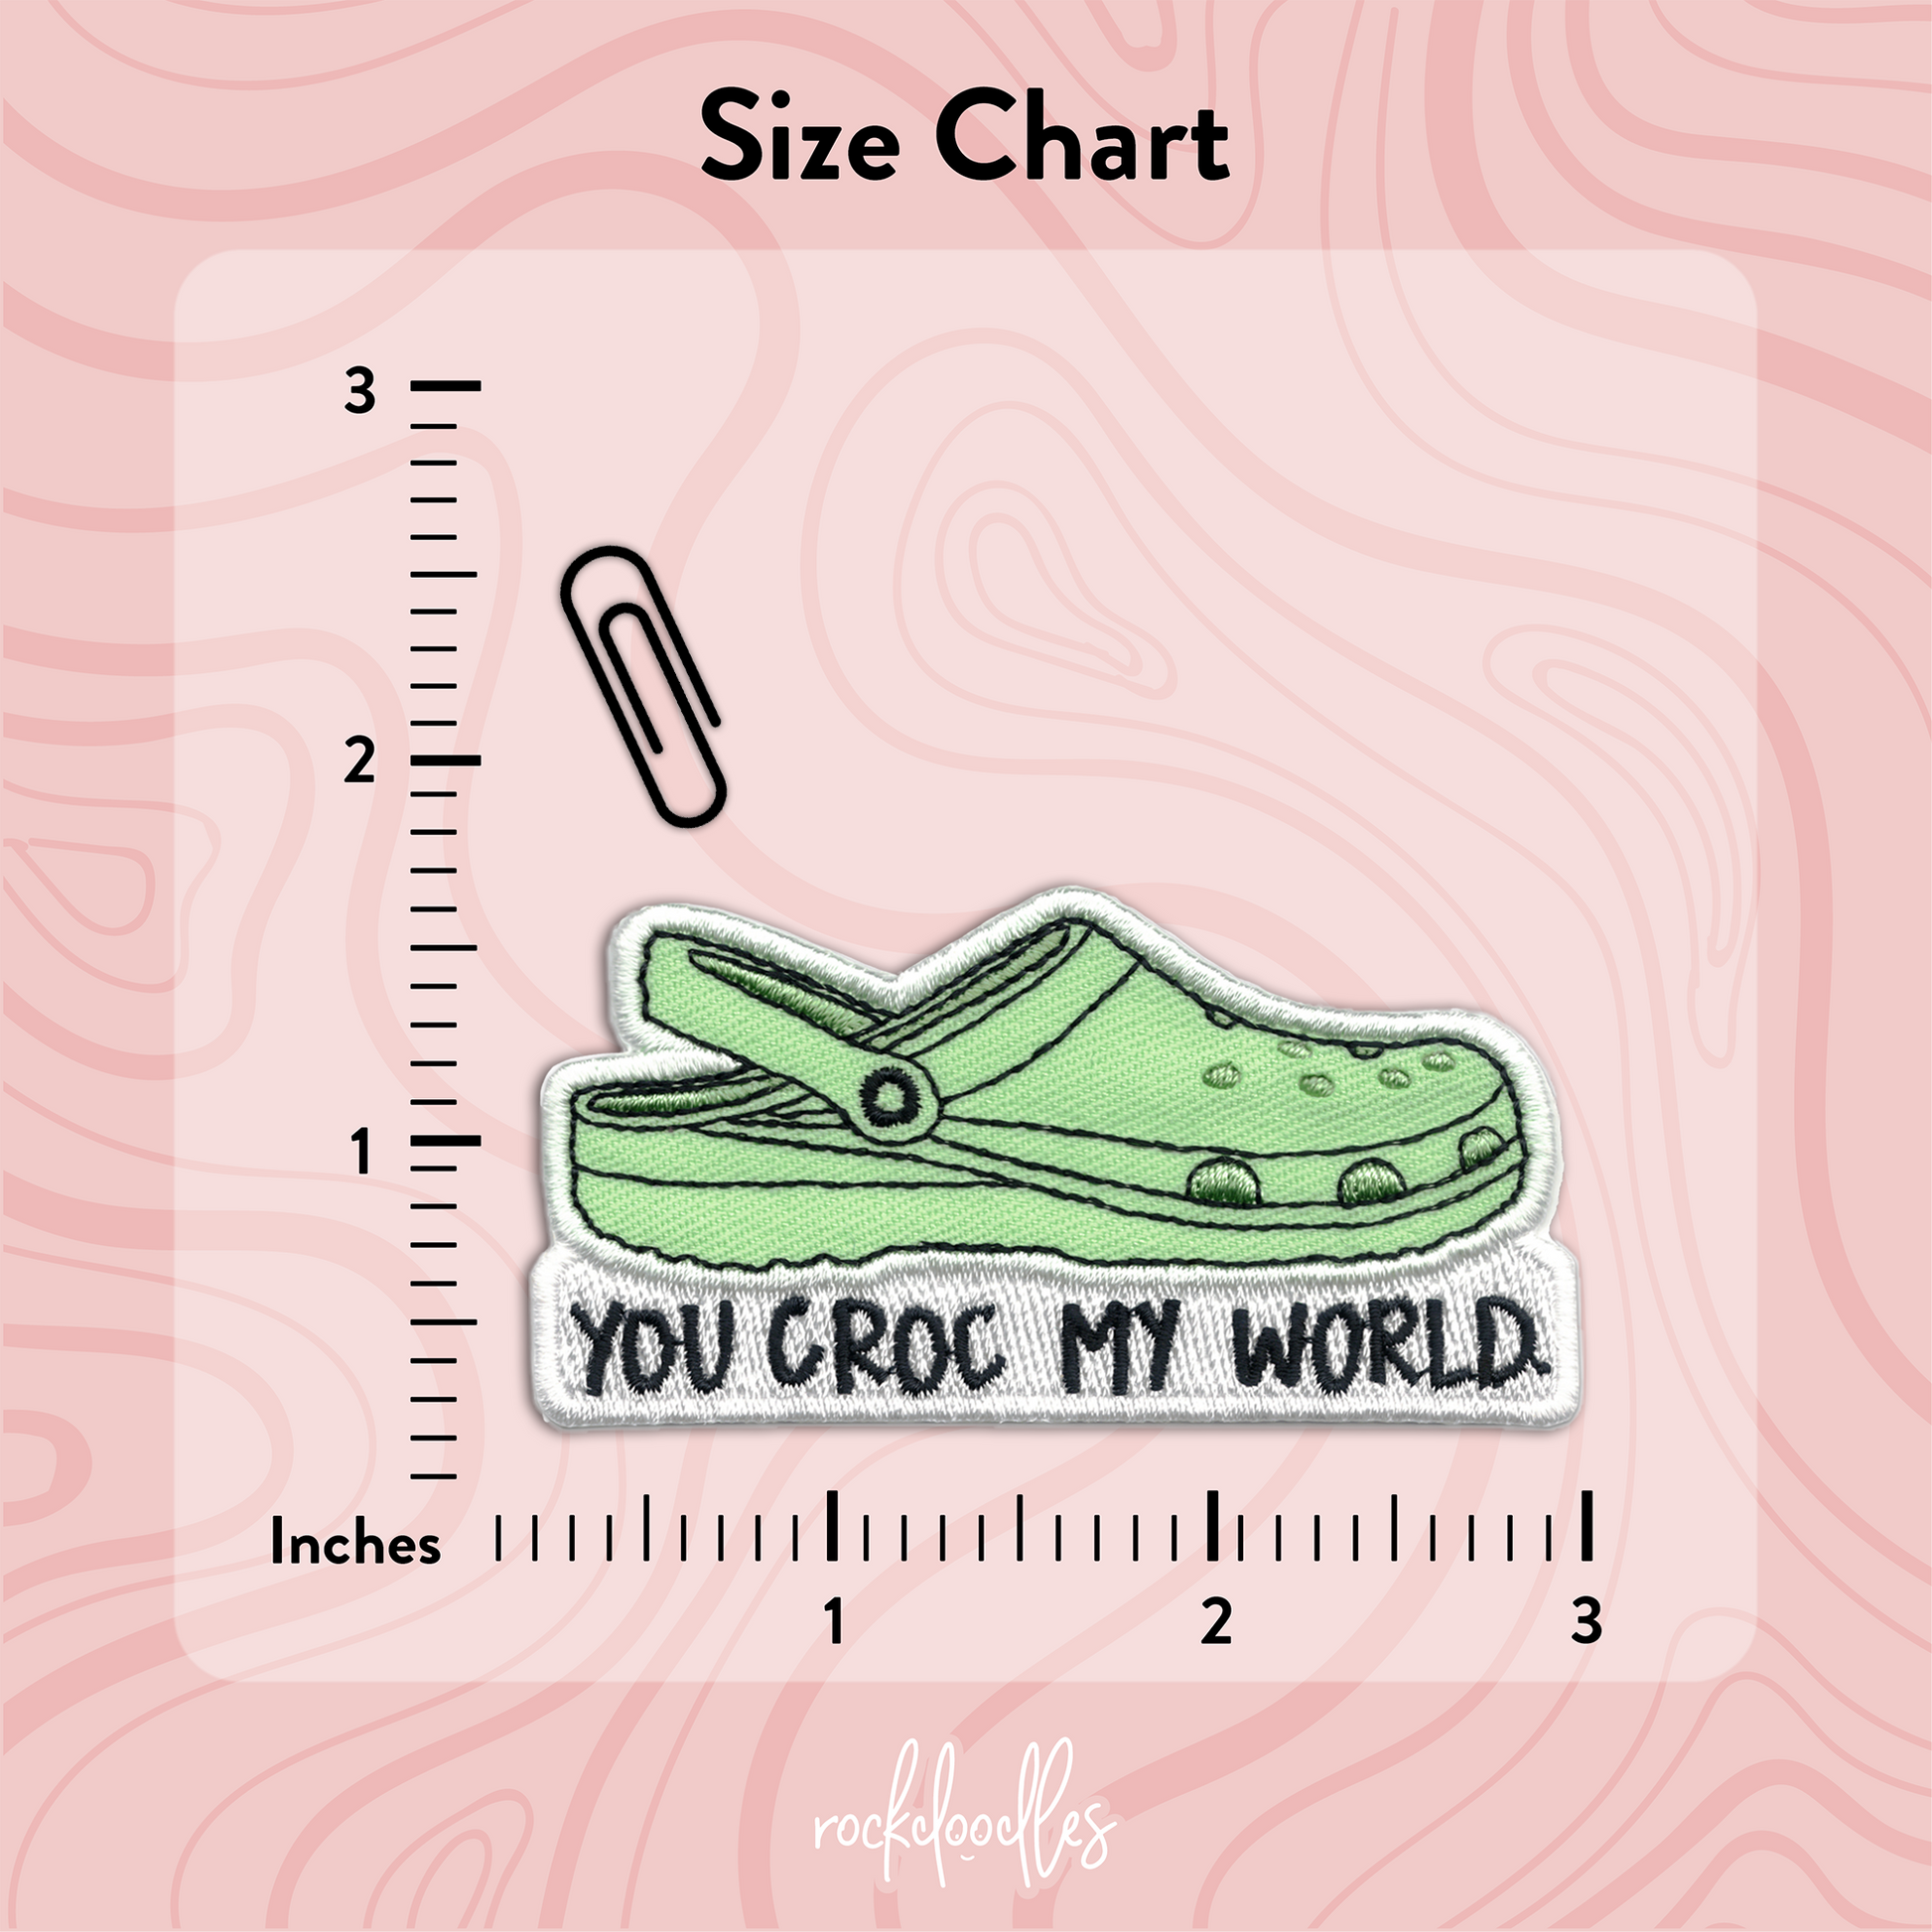 rockdoodles' You Croc My World Patch